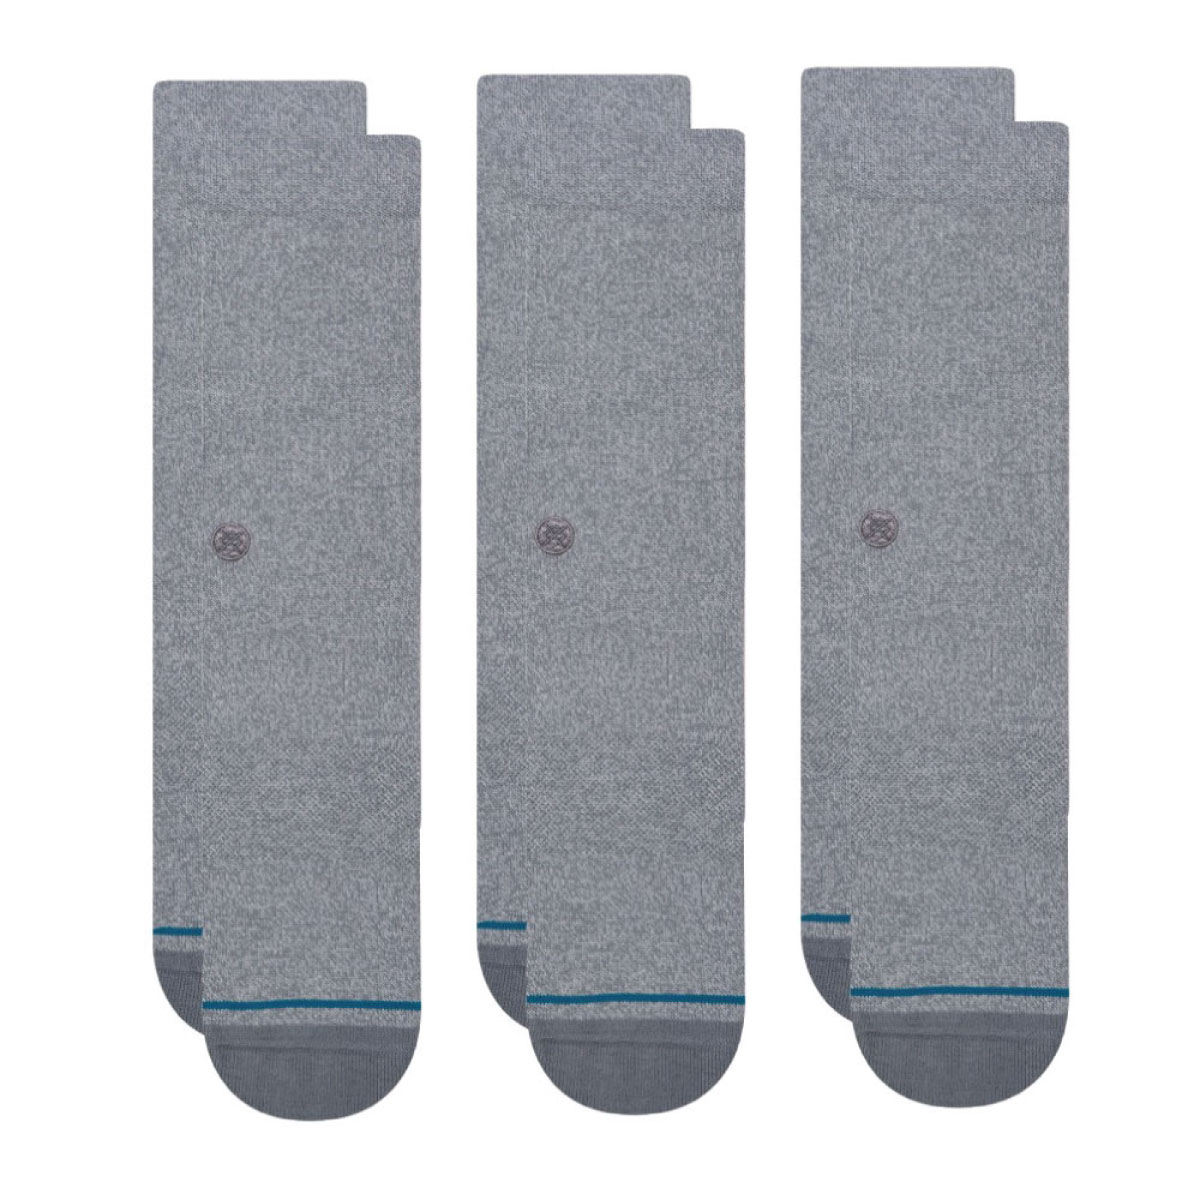 [STANCE]-ICON 3 PACK-GREY HEATHER-